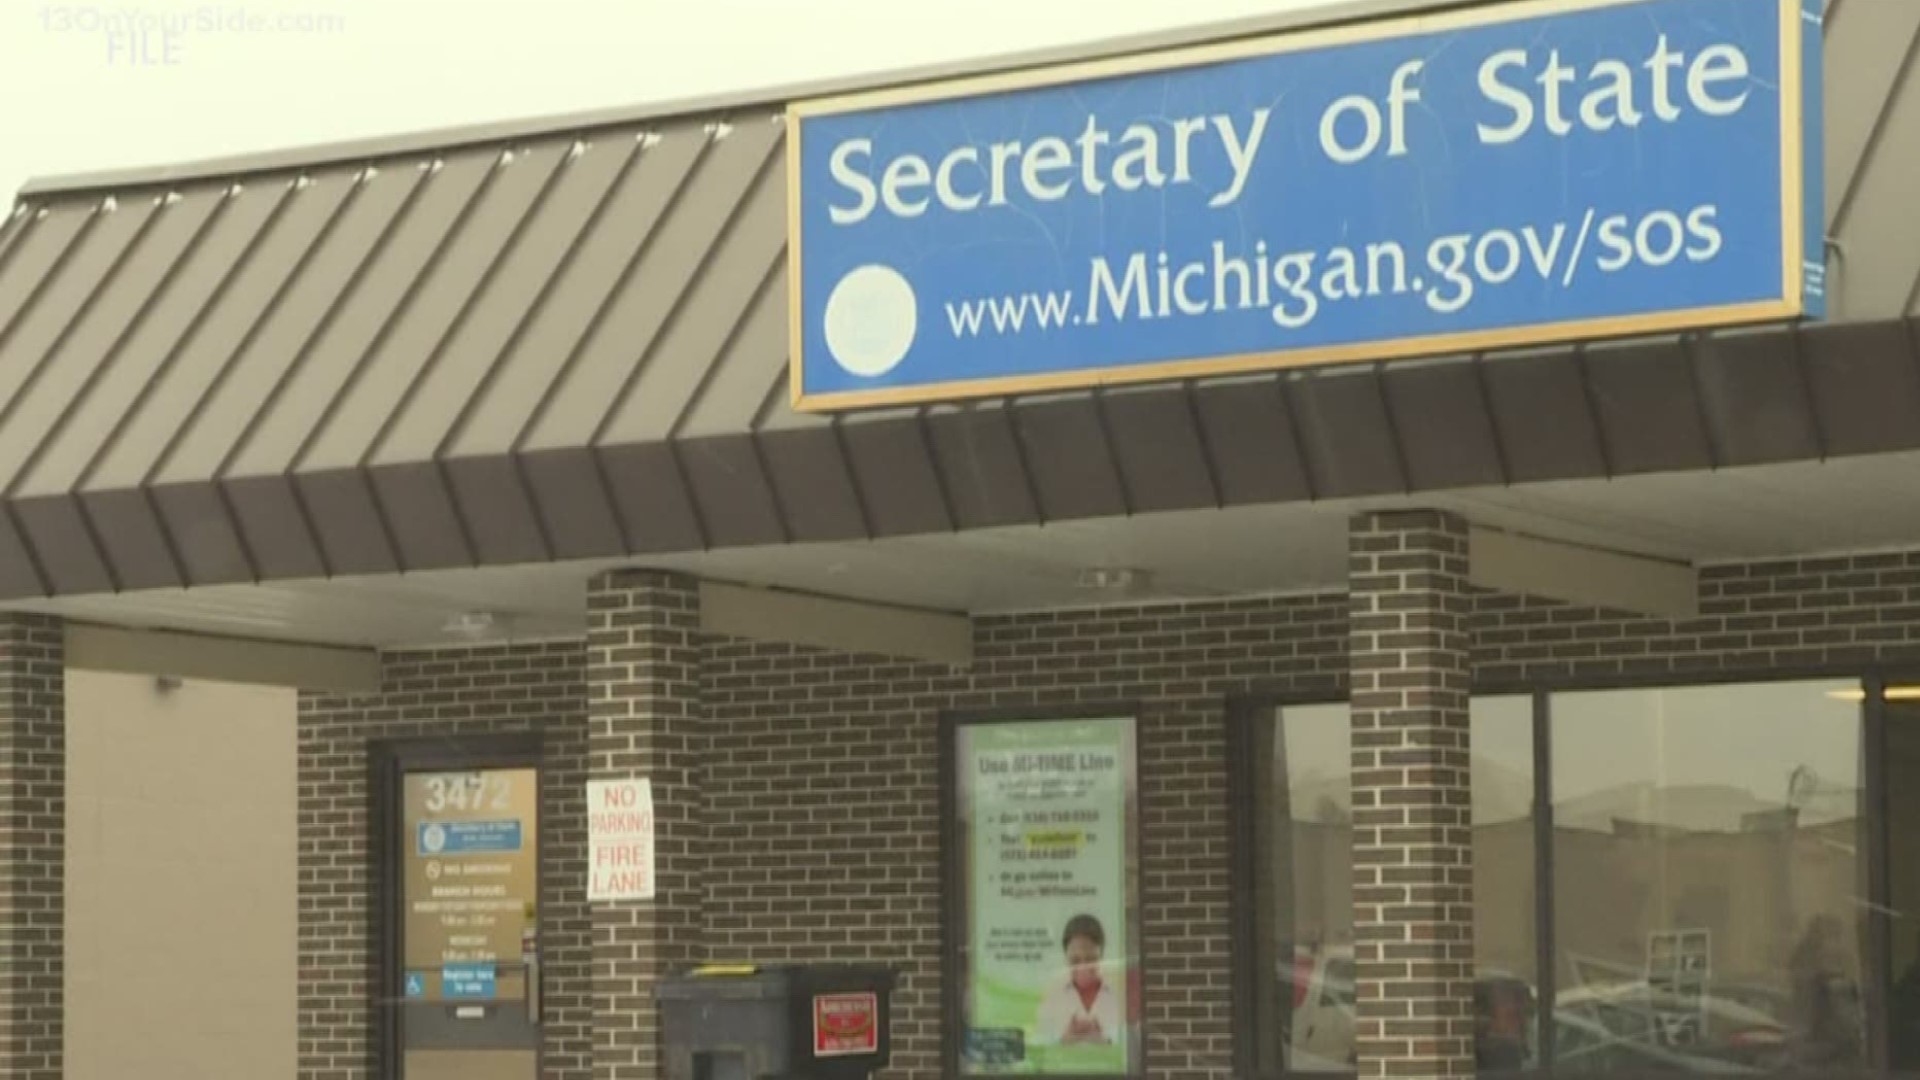 The Michigan Secretary of State's office is working to stop the spread of coronavirus by limiting in-person visits.